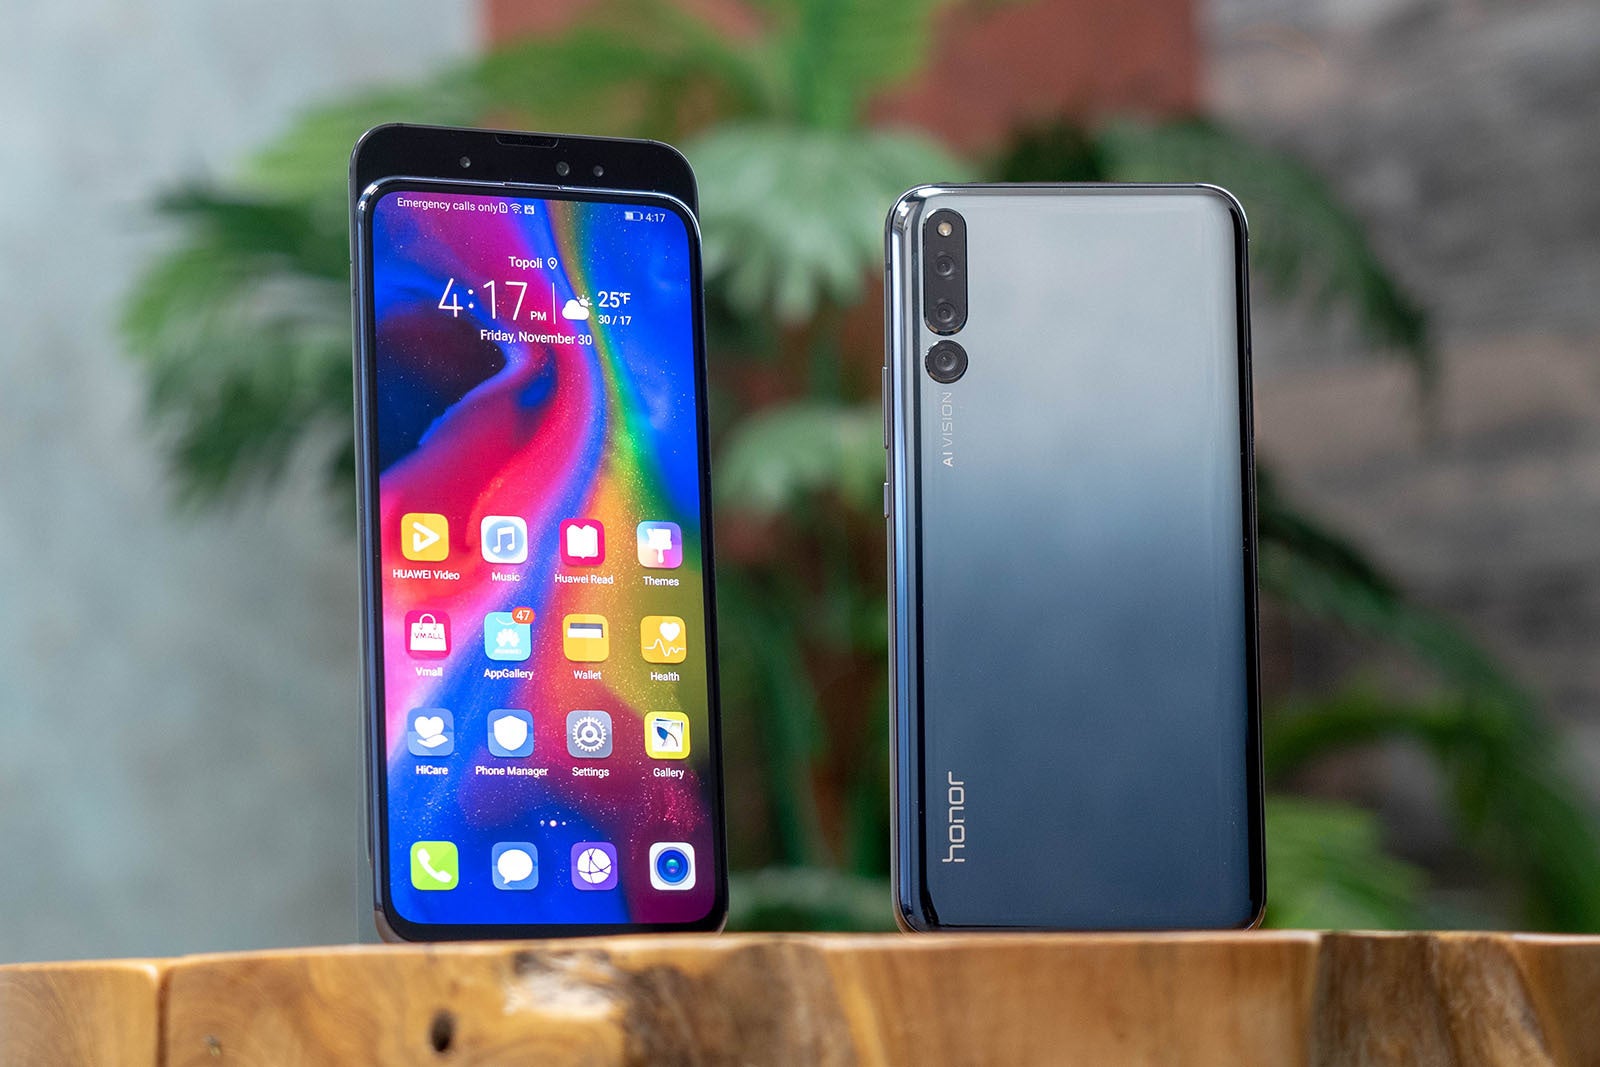 Honor Magic 2: unboxing and hands-on first look